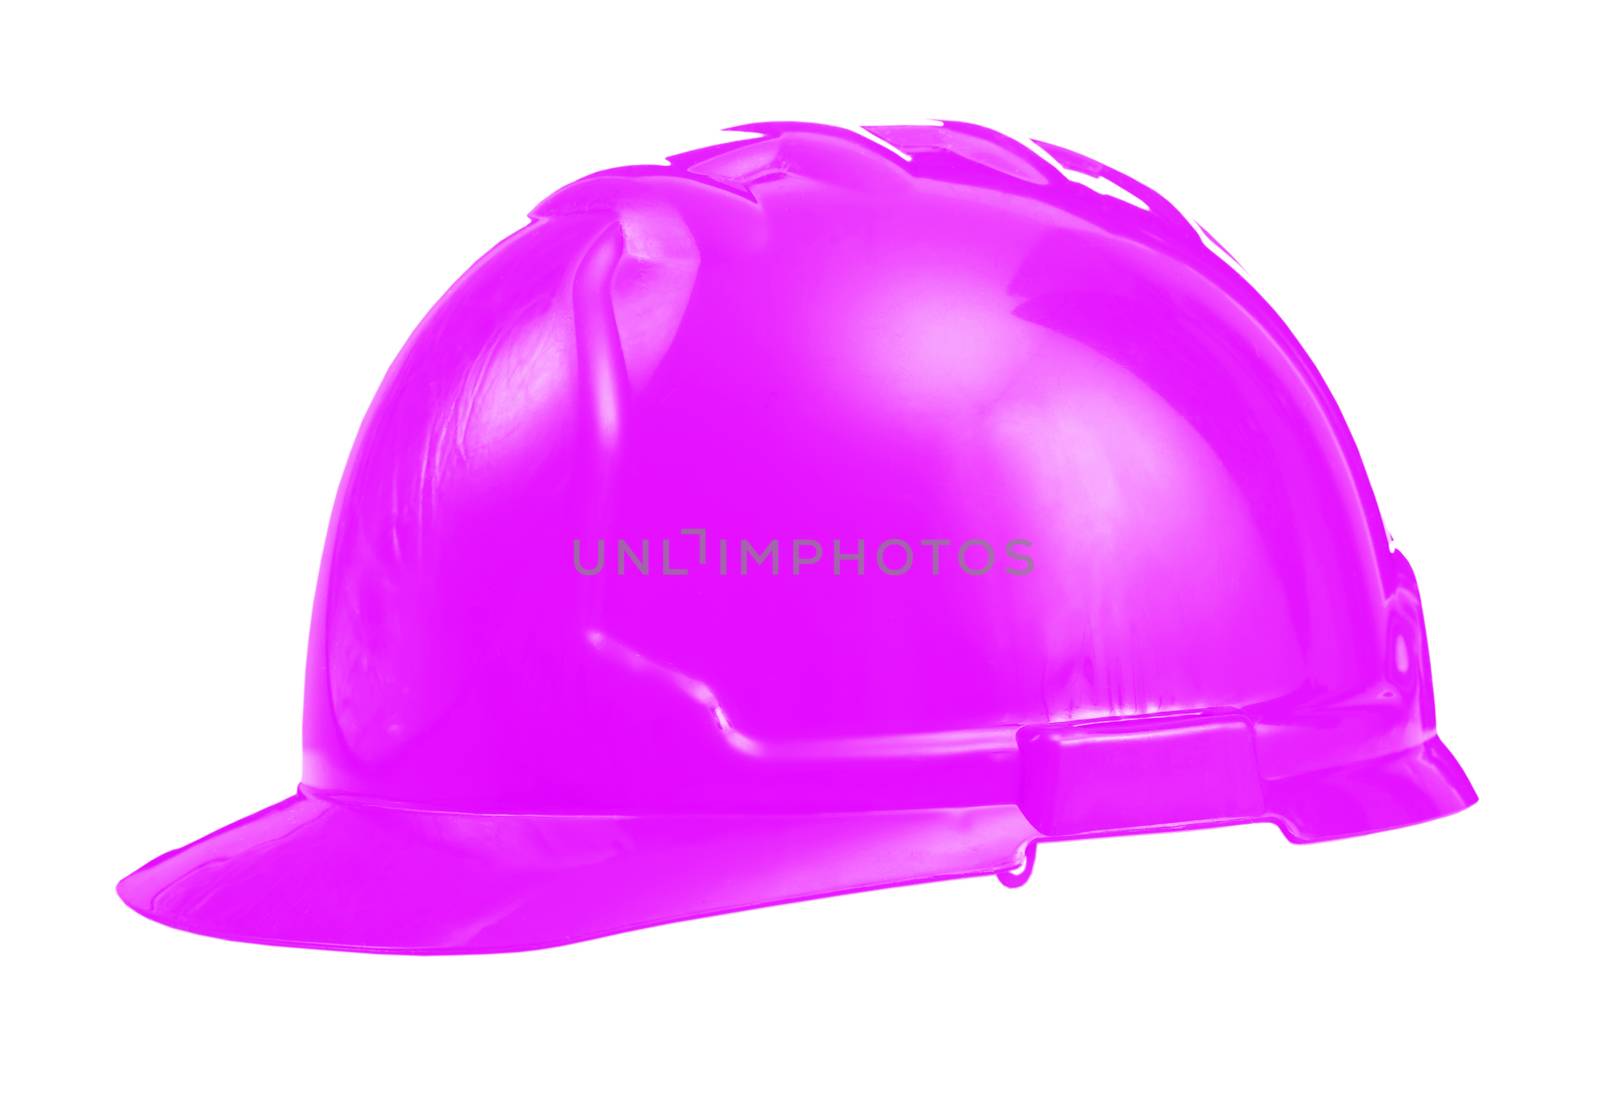 hardhat pink colored isolated on white